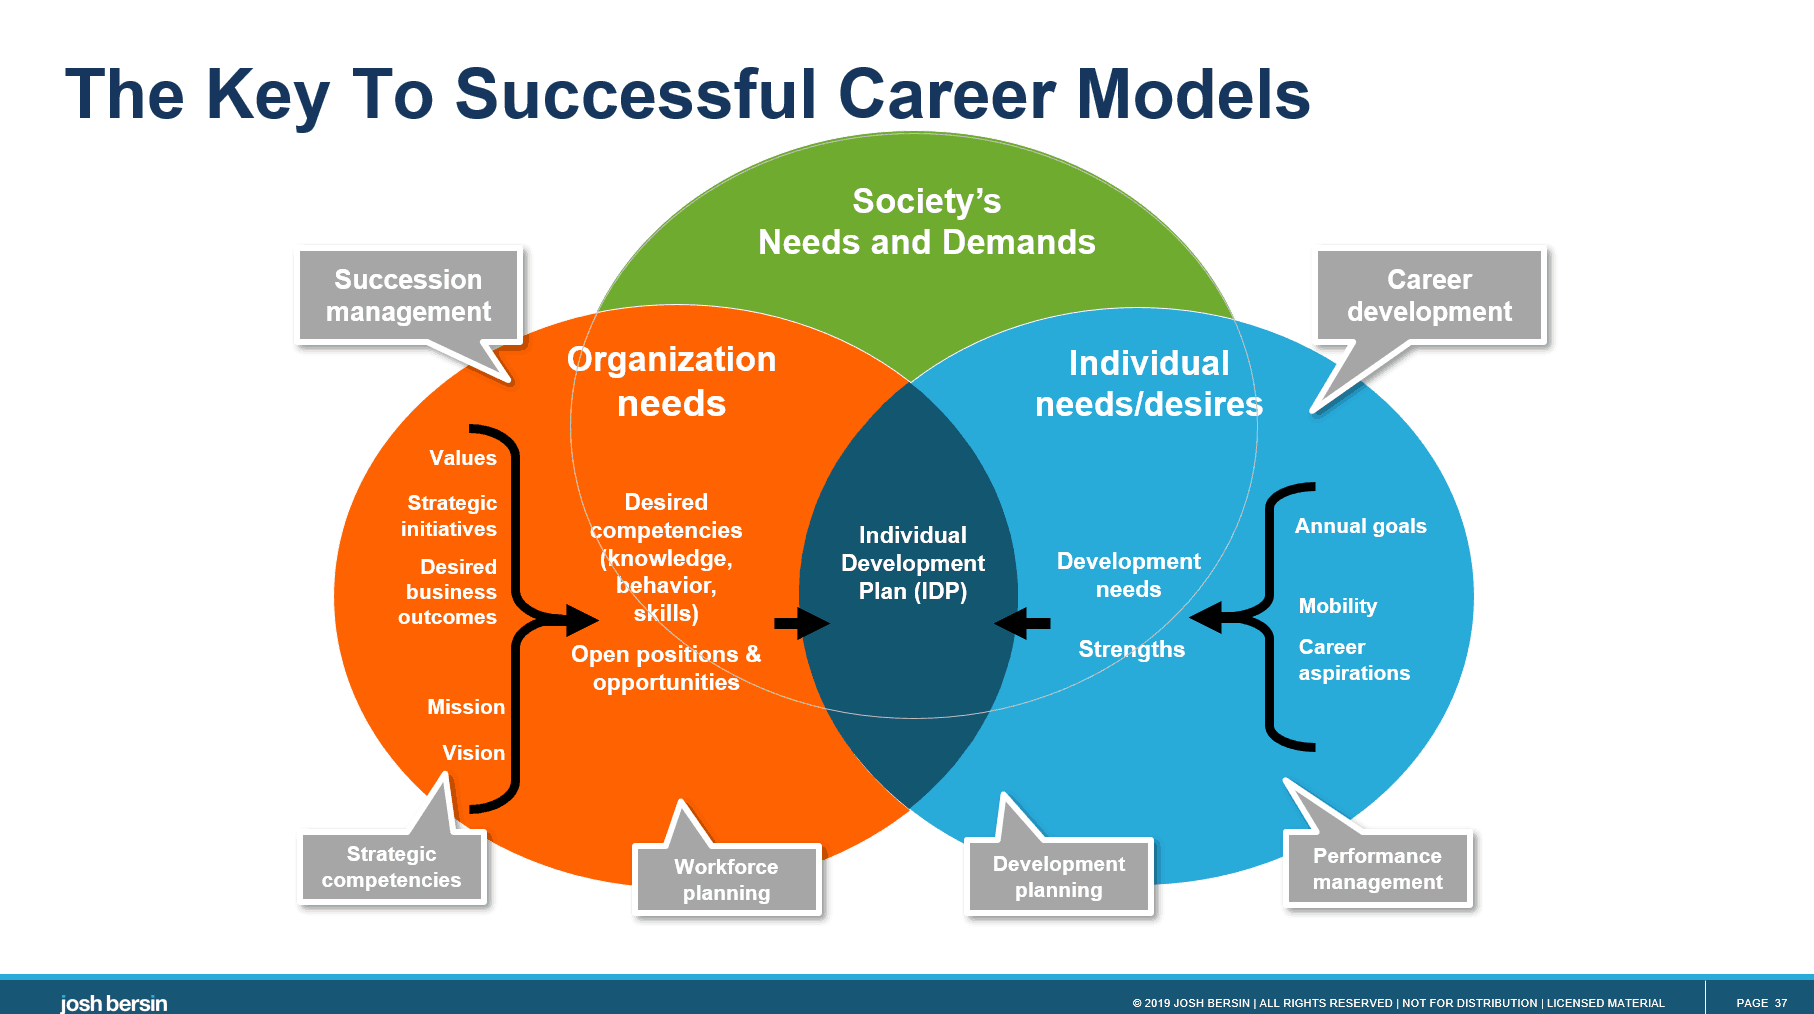 How to Build a Successful and Fulfilling Career